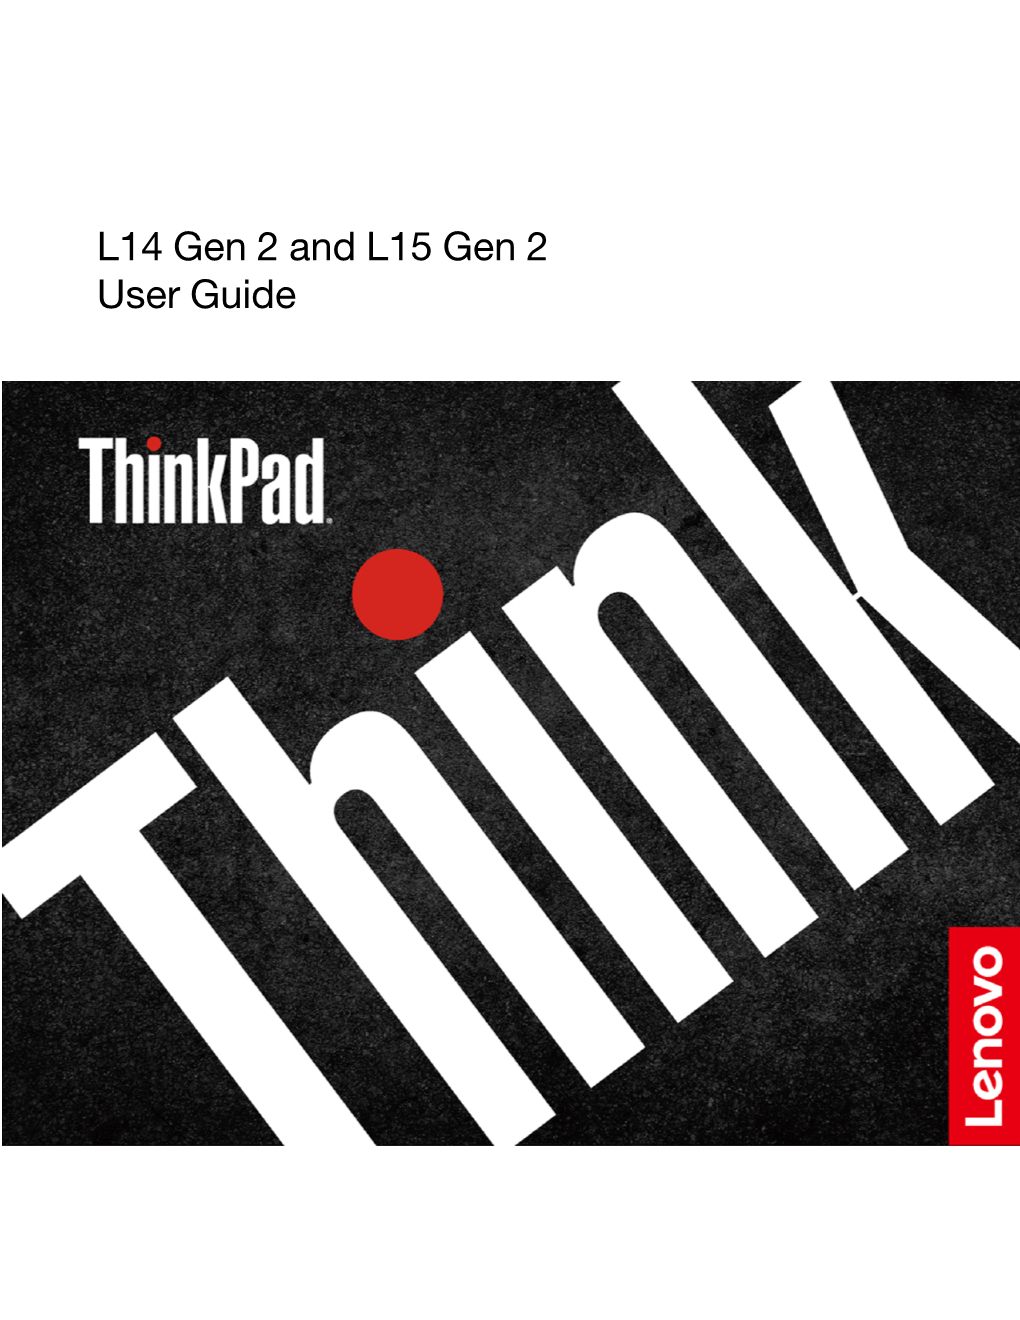 L14 Gen 2 and L15 Gen 2 User Guide Read This First